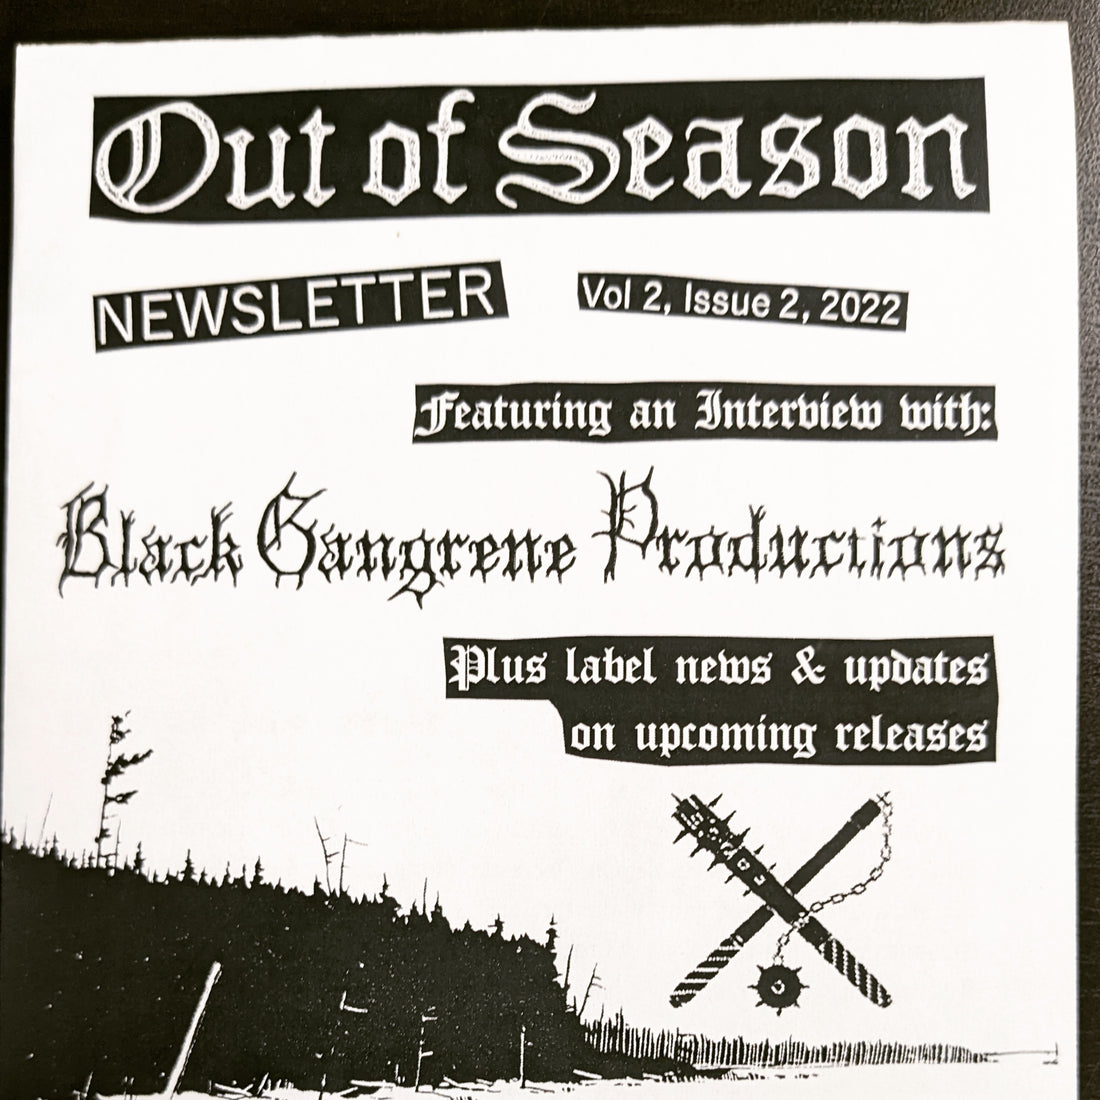 Newsletter with Black Gangrene Records interview